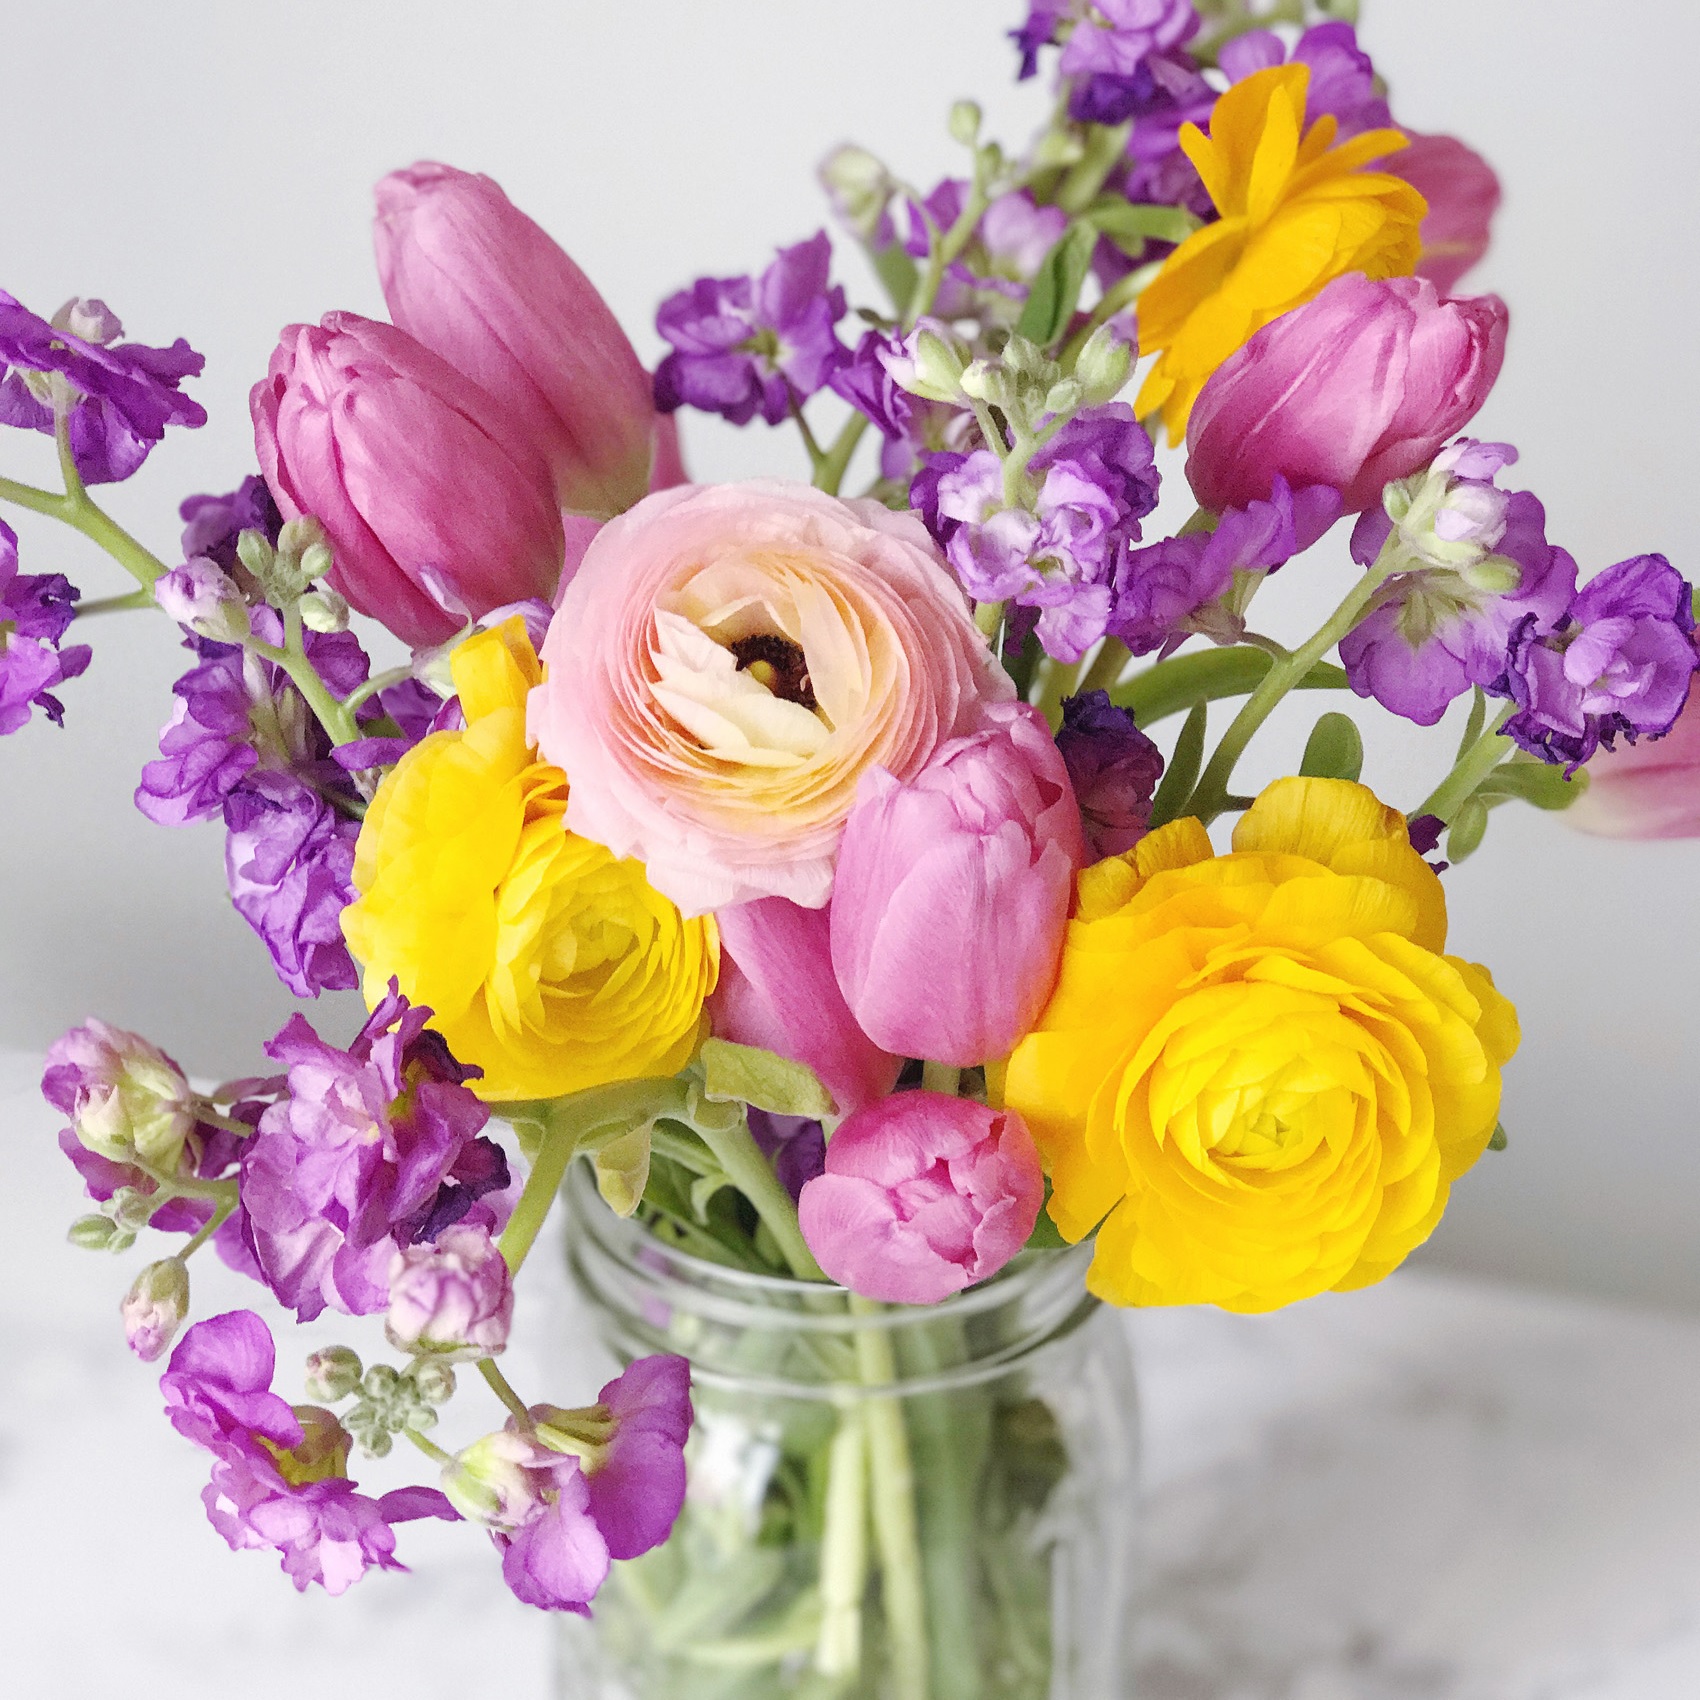 The most popular spring flowers